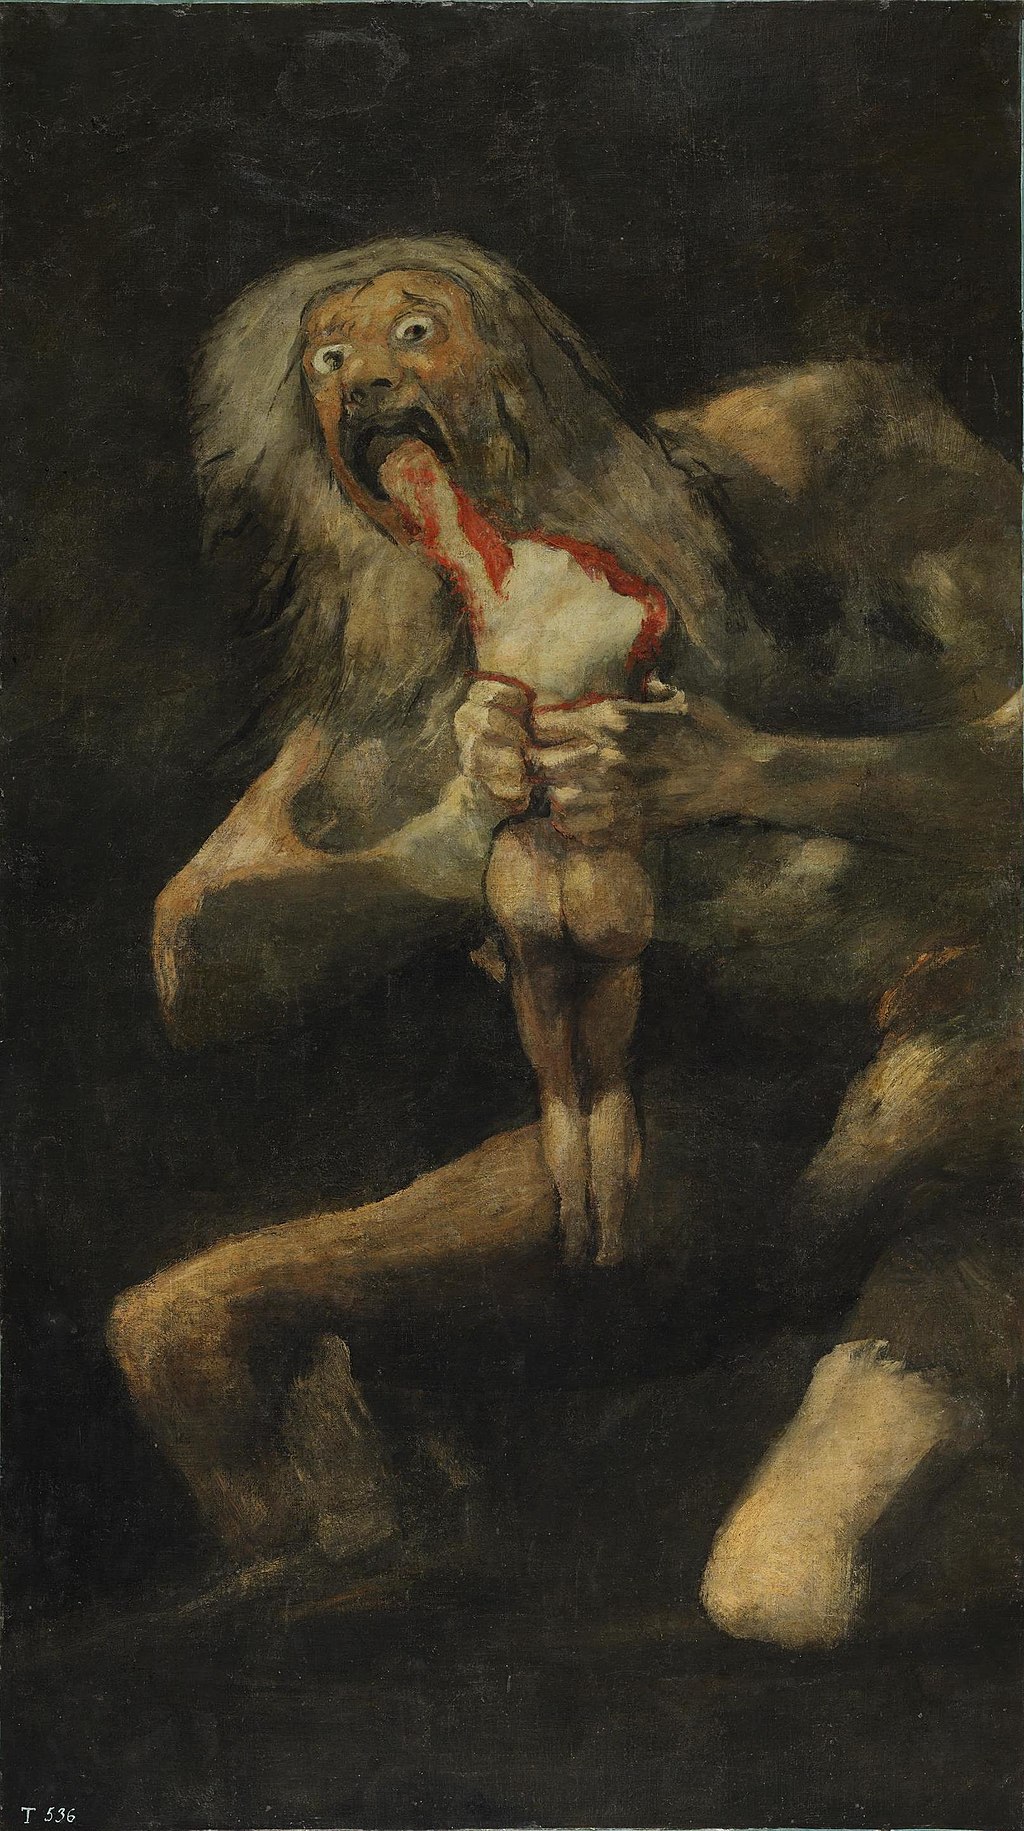  Francisco de Goya, Untitled, known as Saturn Devouring His Son, 1821-93